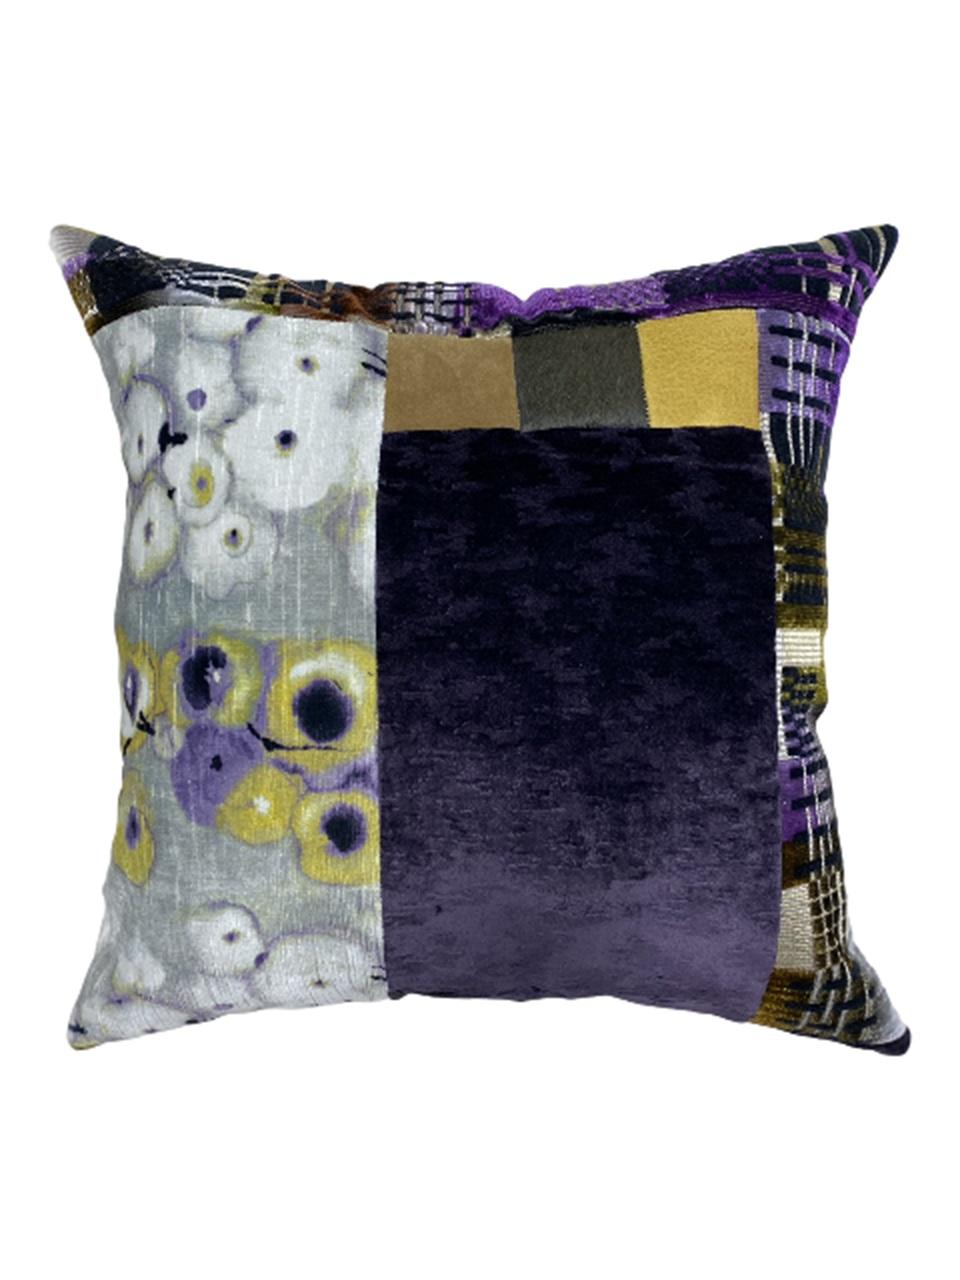 Purple and Saffron Highlight Pillow In Excellent Condition For Sale In Englewood, CO